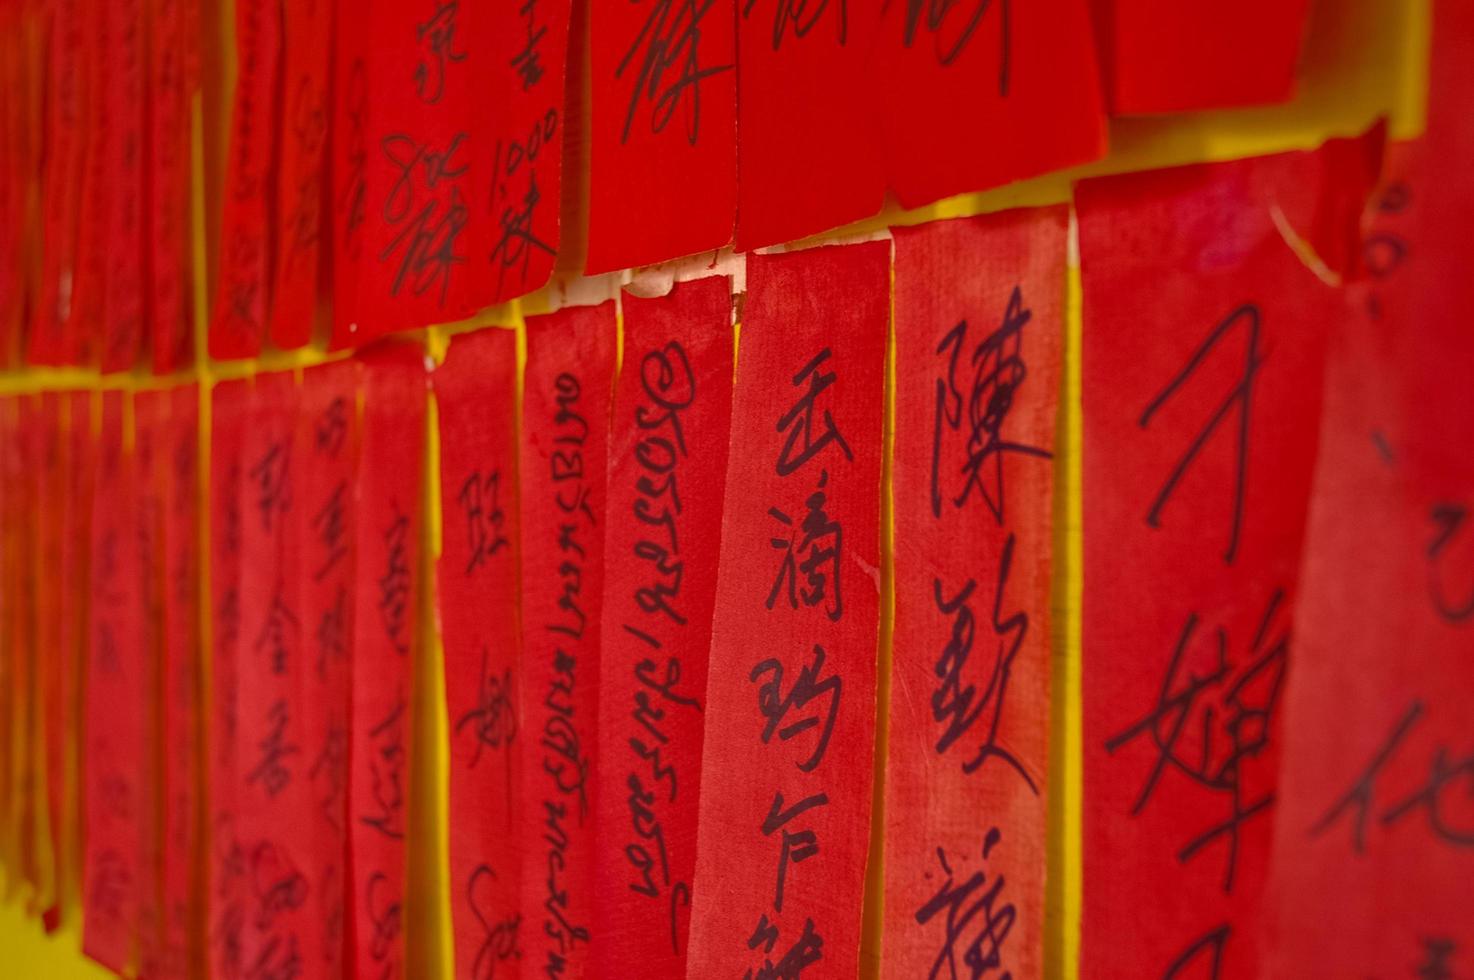 Handwritten Chinese calligraphic charactors on red tags photo